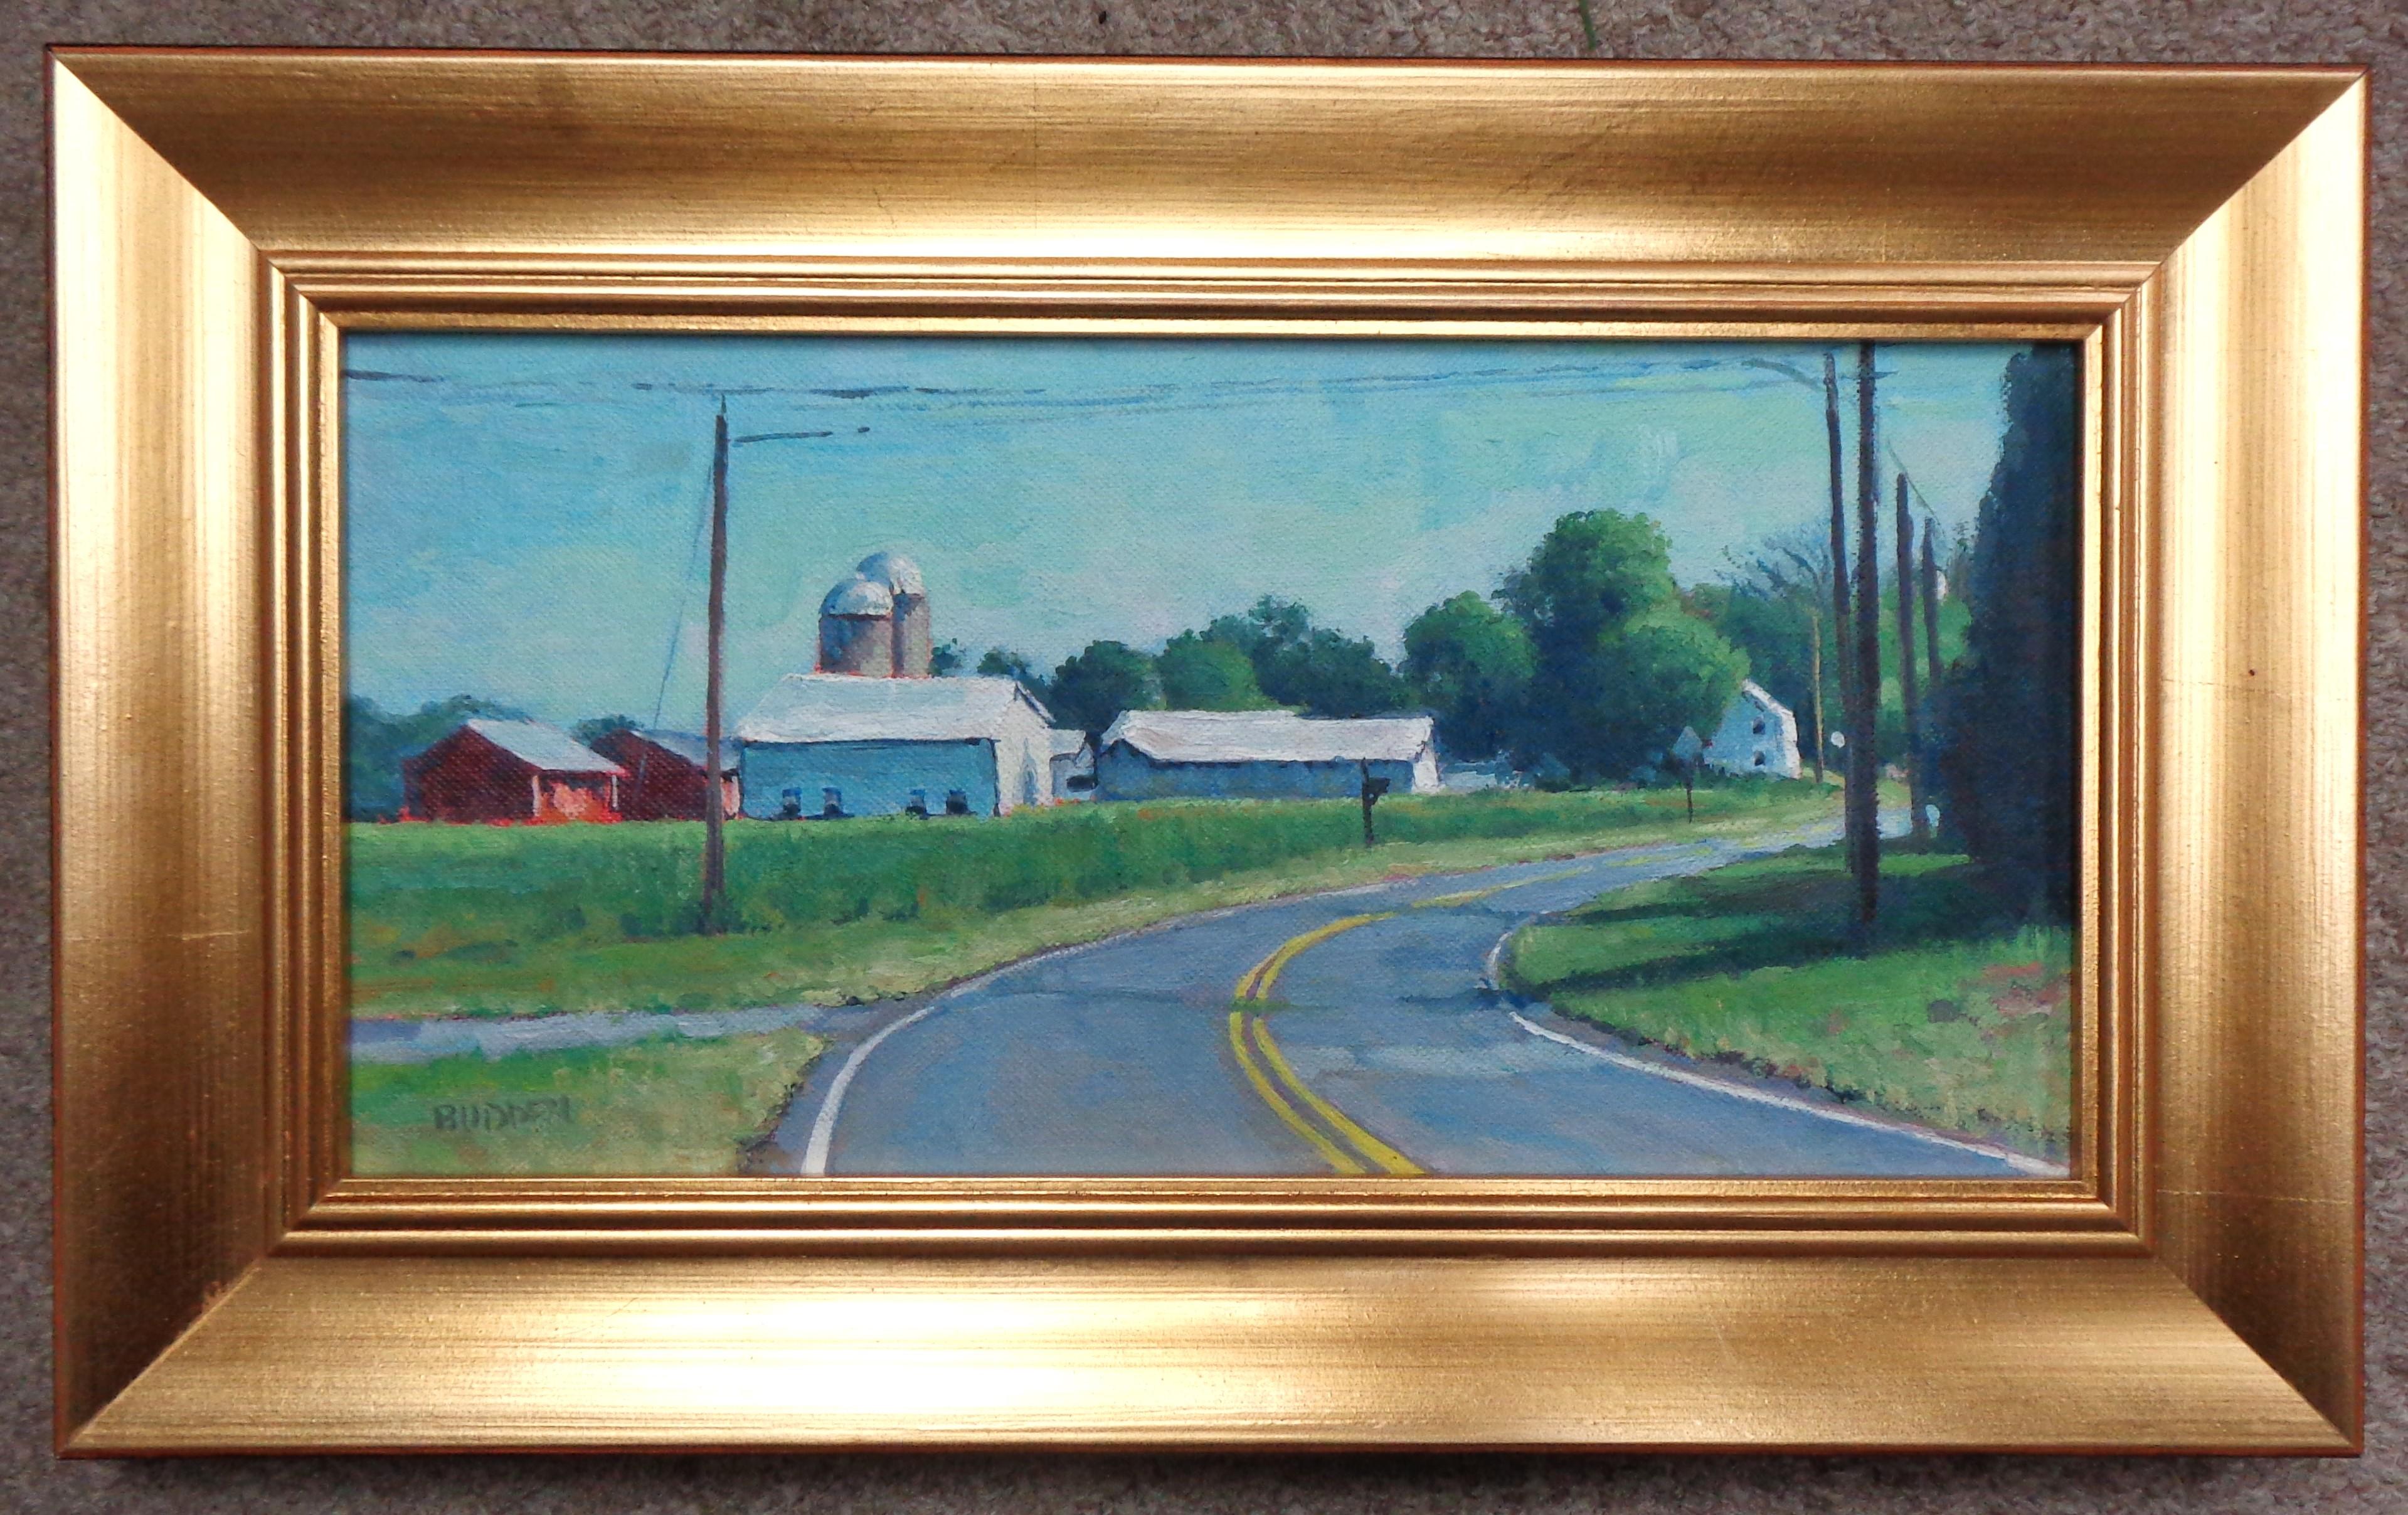 Rural Road Along Rt 616 Study
An oil painting on canvas by award winning contemporary artist Michael Budden that showcases a beautiful country road and farm landscape study.   The image measures 6 x 12 unframed and 9.25 x 15.25 framed.  
ARTIST'S